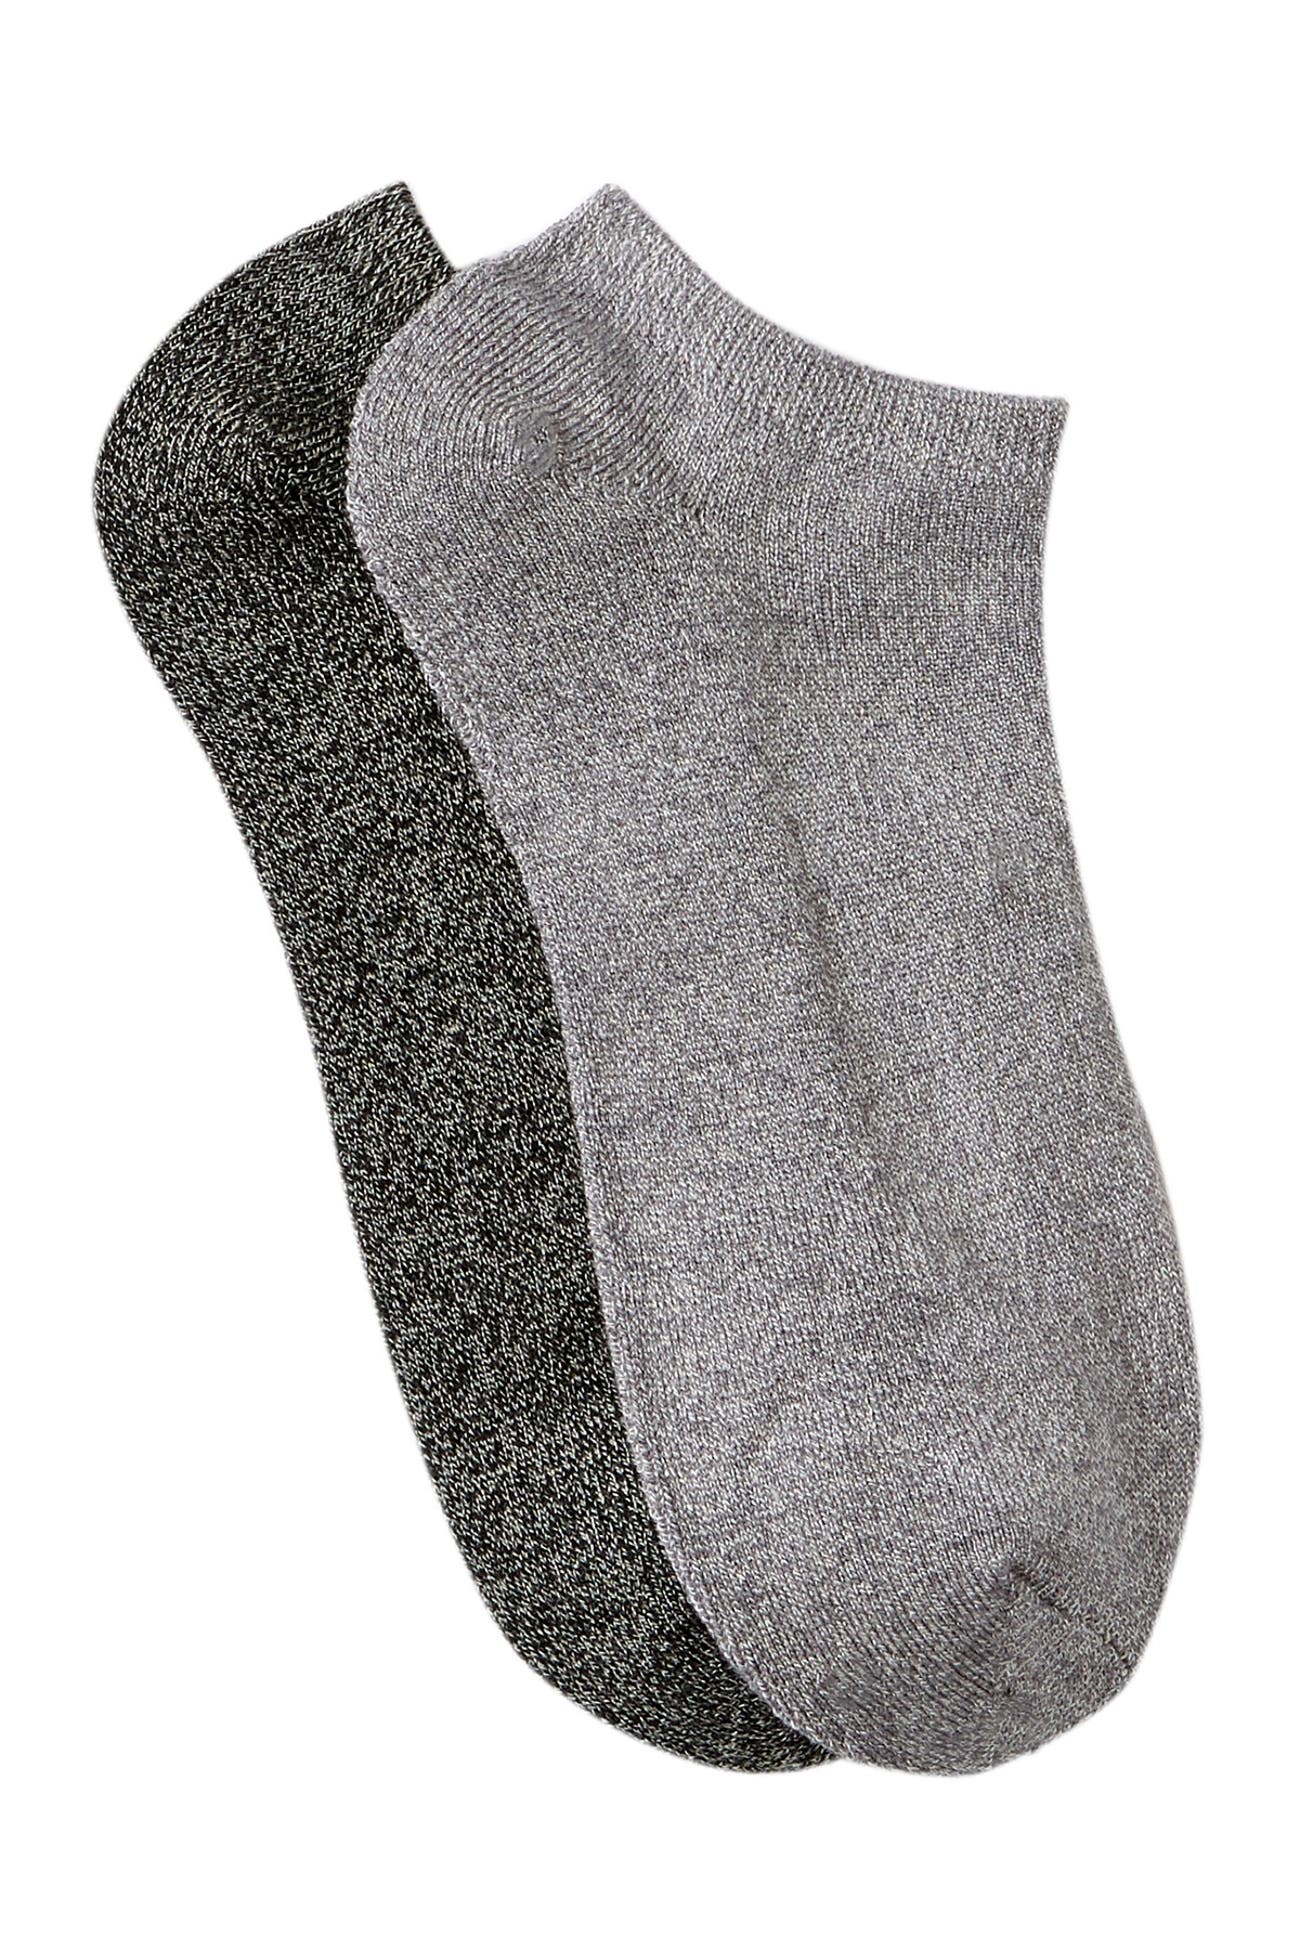 shimera | Pillow Sole Low Cut Socks - Pack of 2 | Nordstrom Rack